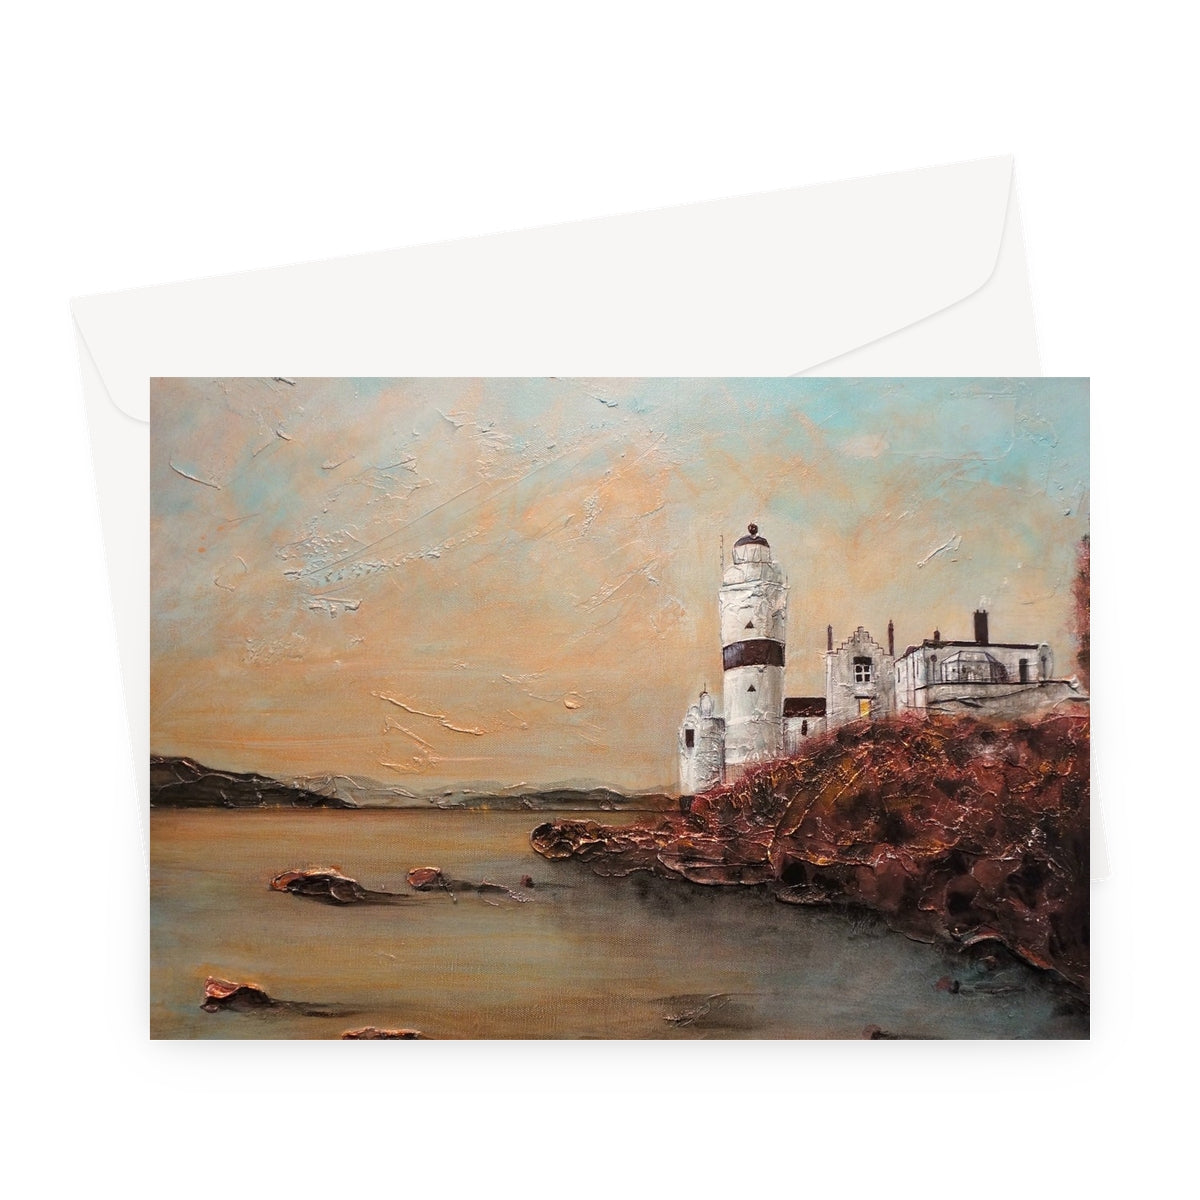 Cloch Lighthouse Dawn Art Gifts Greeting Card-Stationery-River Clyde Art Gallery-A5 Landscape-1 Card-Paintings, Prints, Homeware, Art Gifts From Scotland By Scottish Artist Kevin Hunter